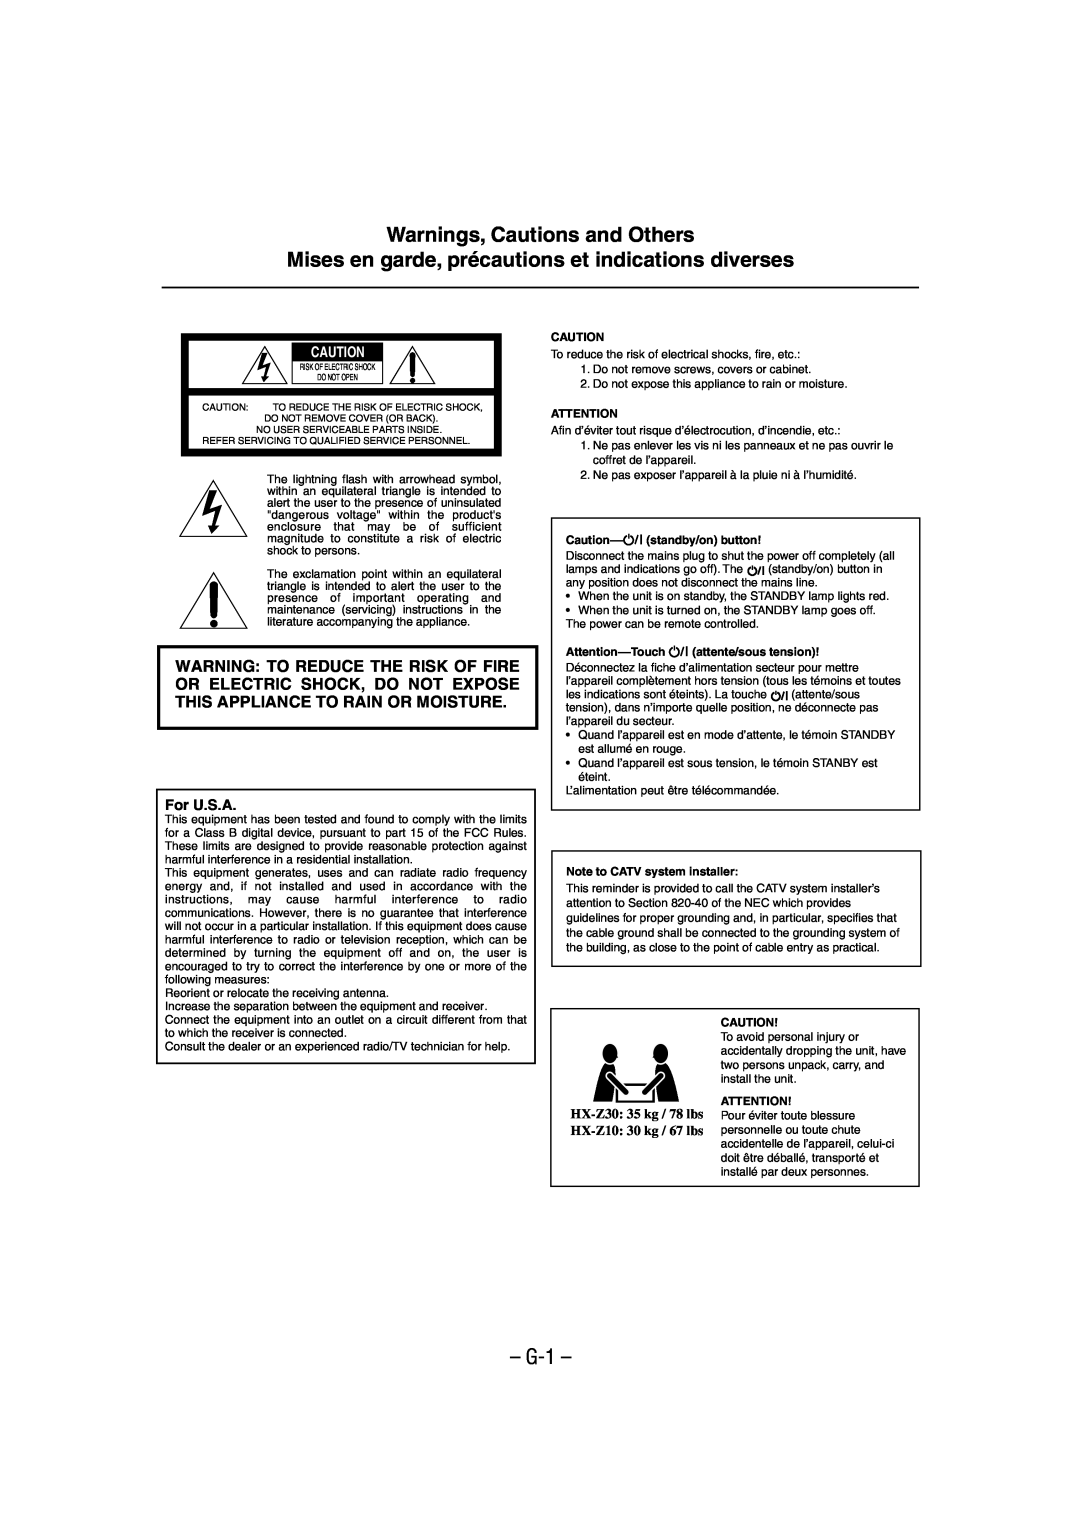 JVC HX-Z30 manual Warnings, Cautions and Others, G-1, For U.S.A, Caution--standby/on button, Note to CATV system installer 